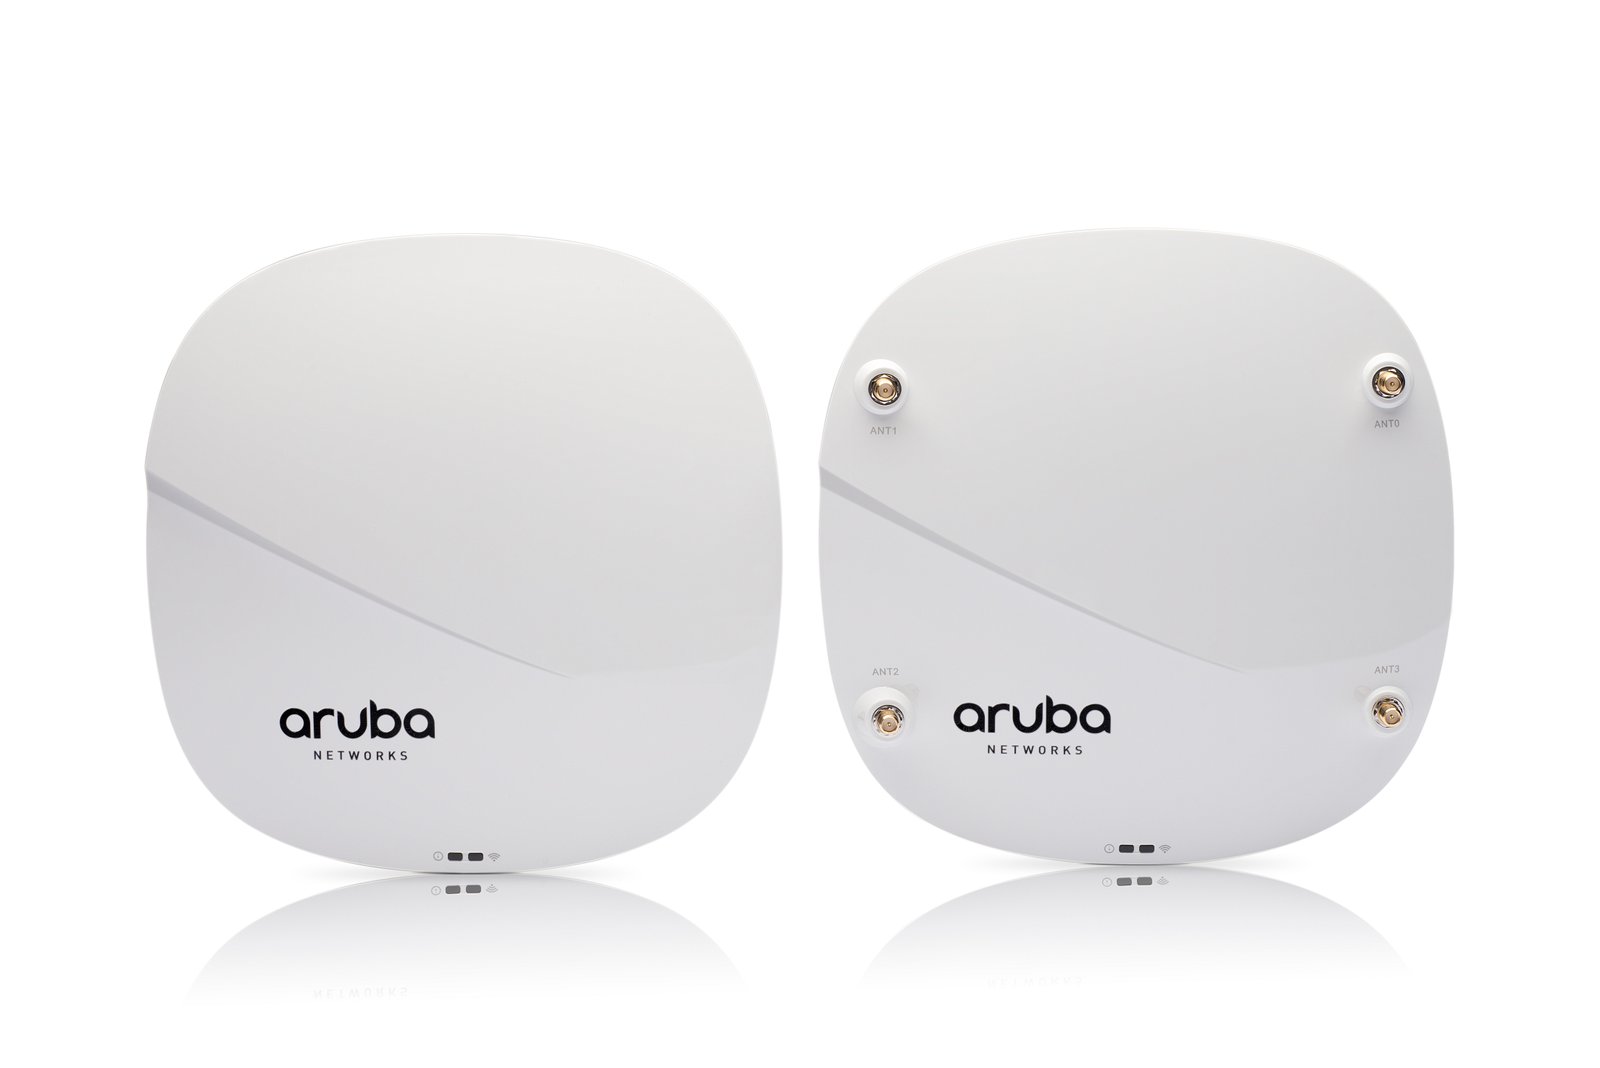 Aruba’s New Asset Tracking Solution Integrates into WLAN Infrastructure